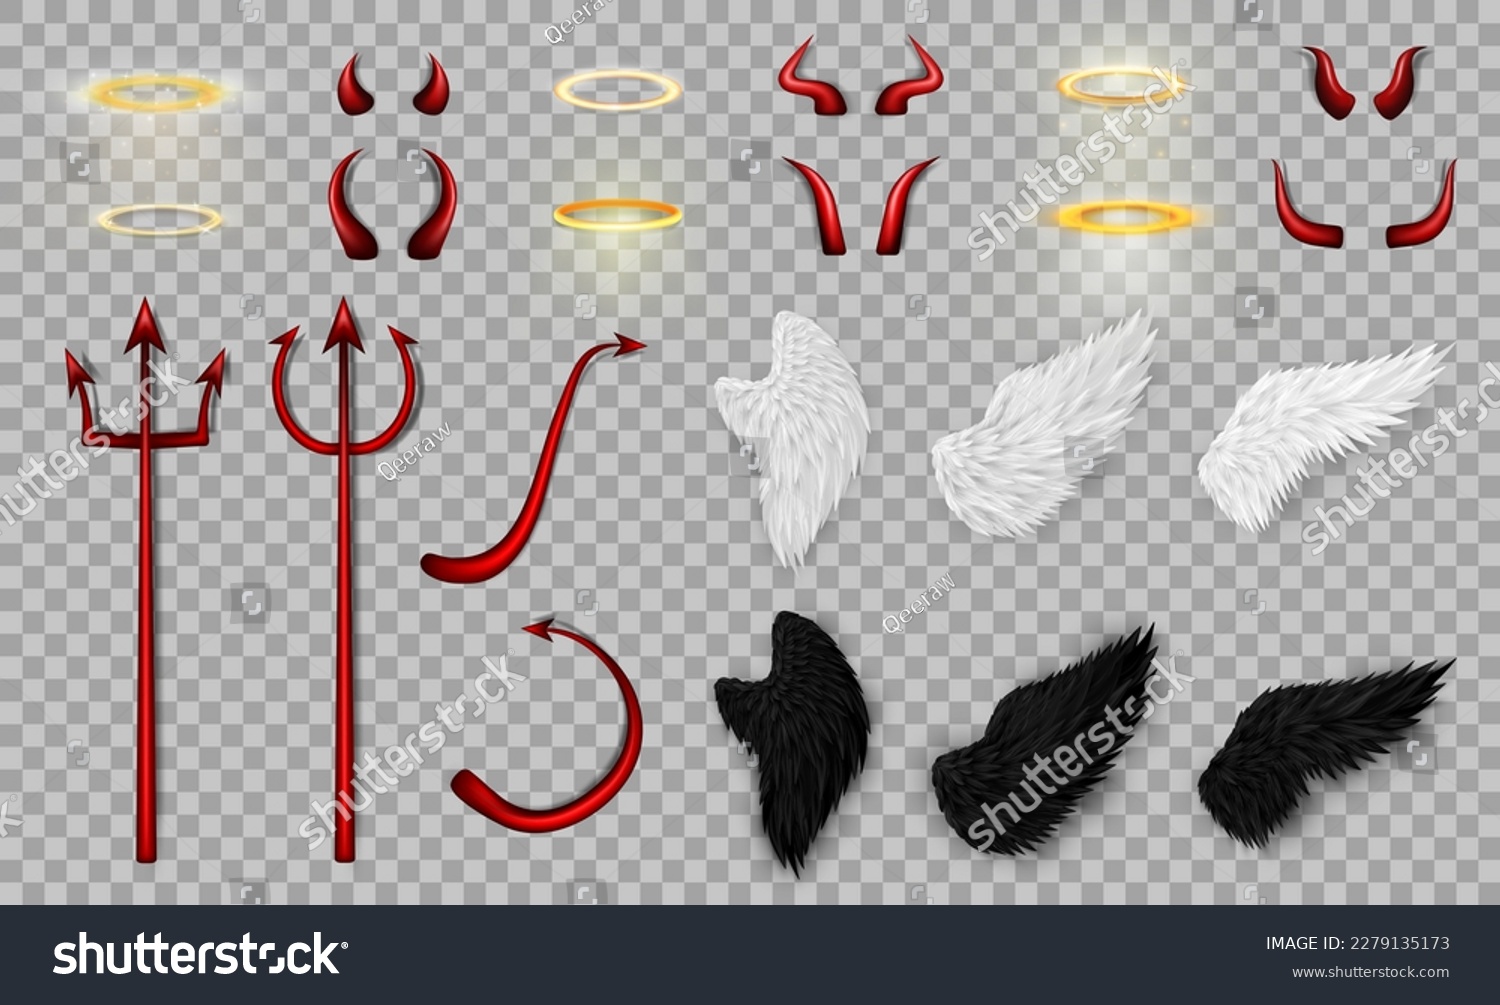 Big collection of 3d realistic angel and devil costume elements - red bloody trident, glossy horns and tails different shape, golden nimbus (halo) and various angelic white and devil black wings #2279135173